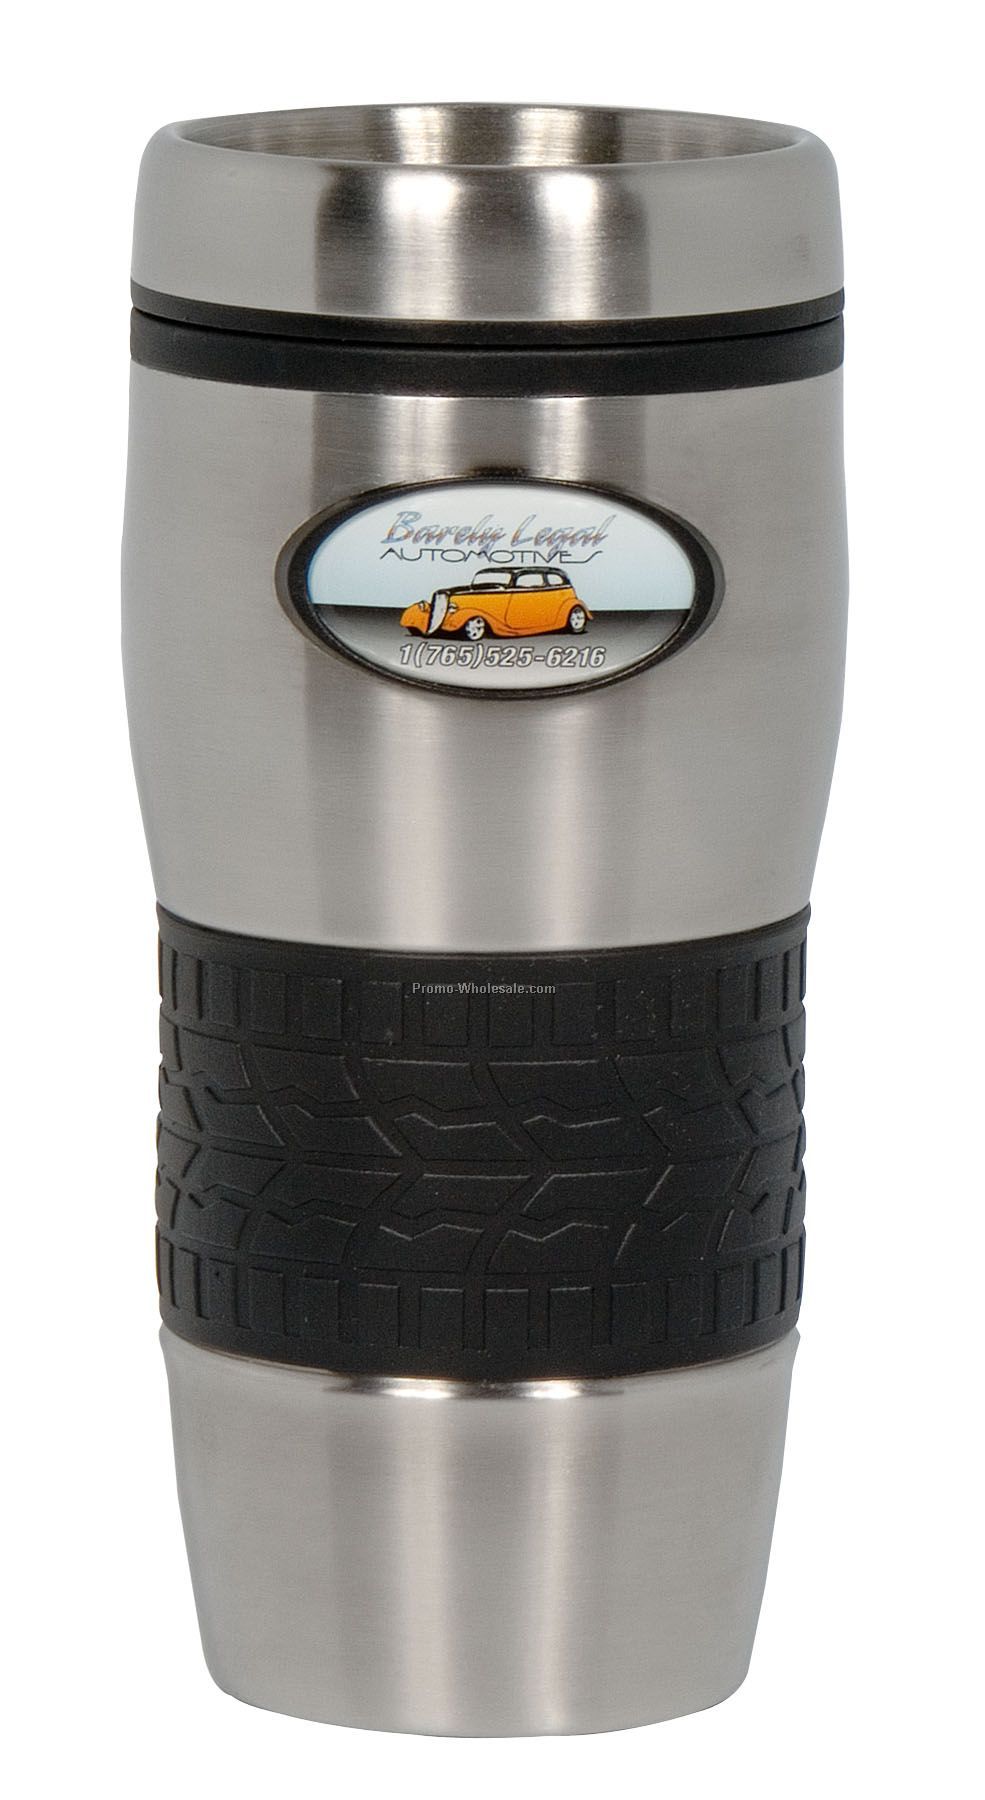 Stainless Steel Tire Tumbler With Spill Resistant Lid